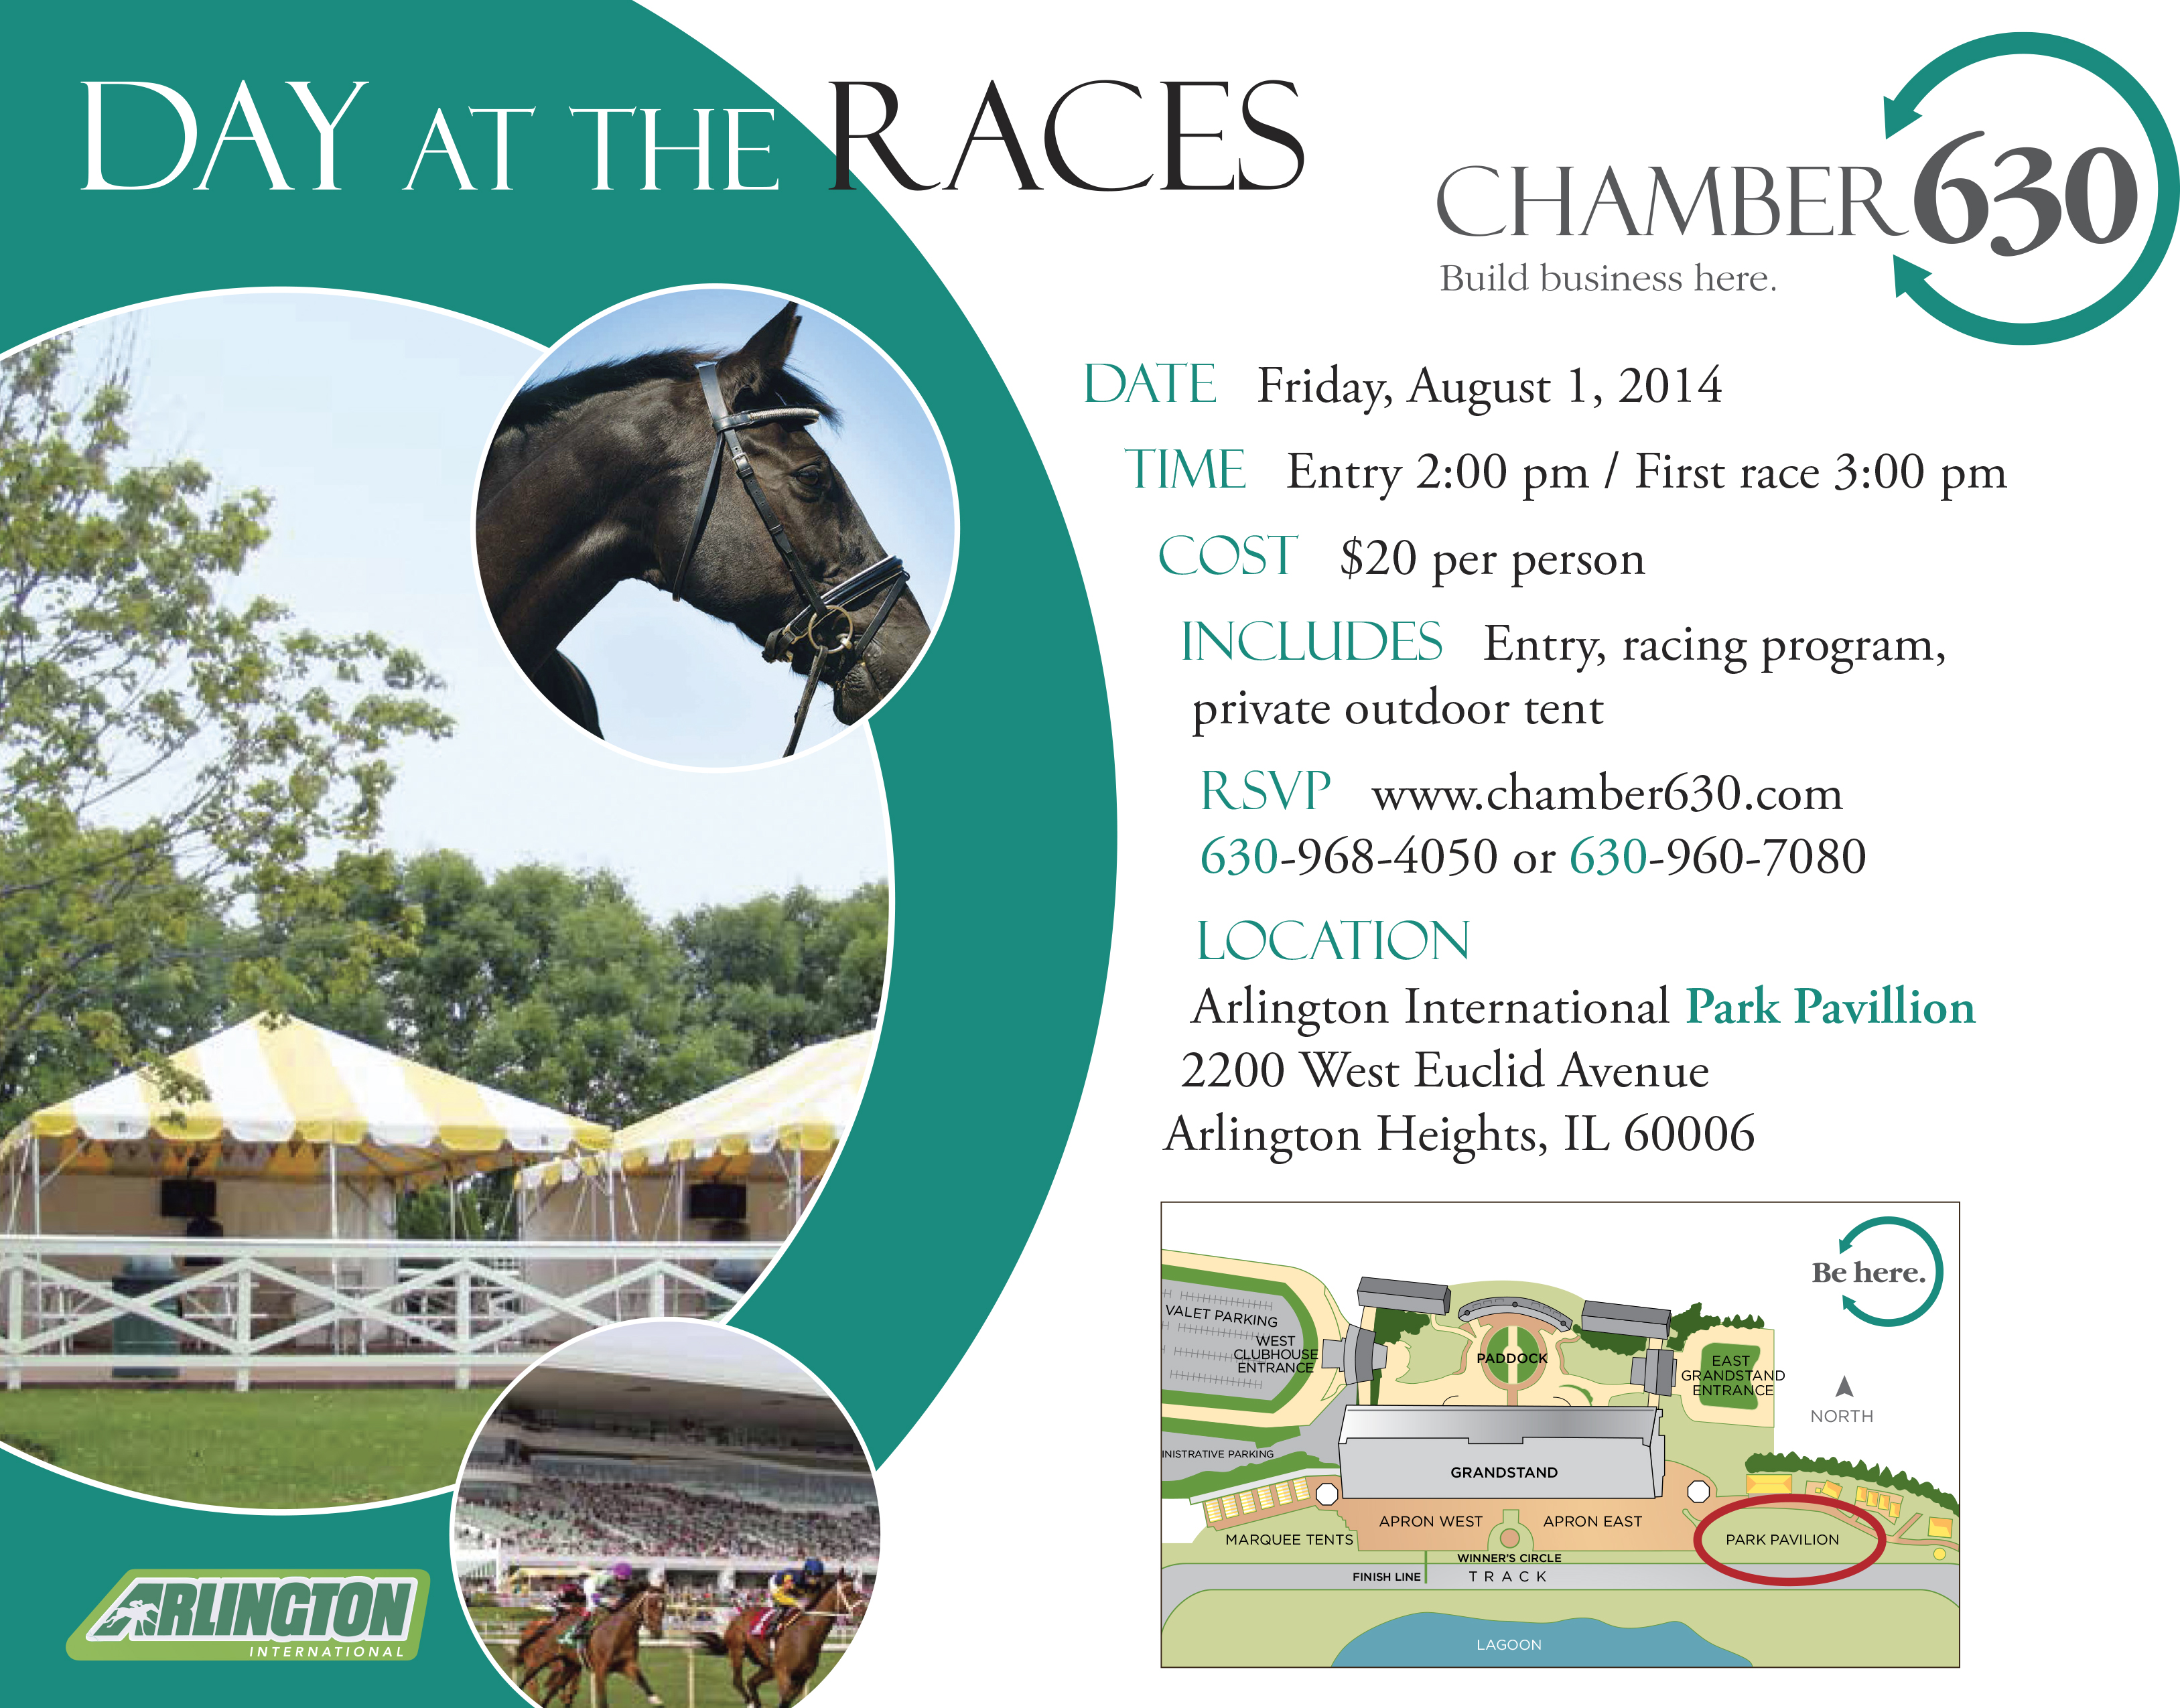 Chamber630 Day at the Races flyer 2